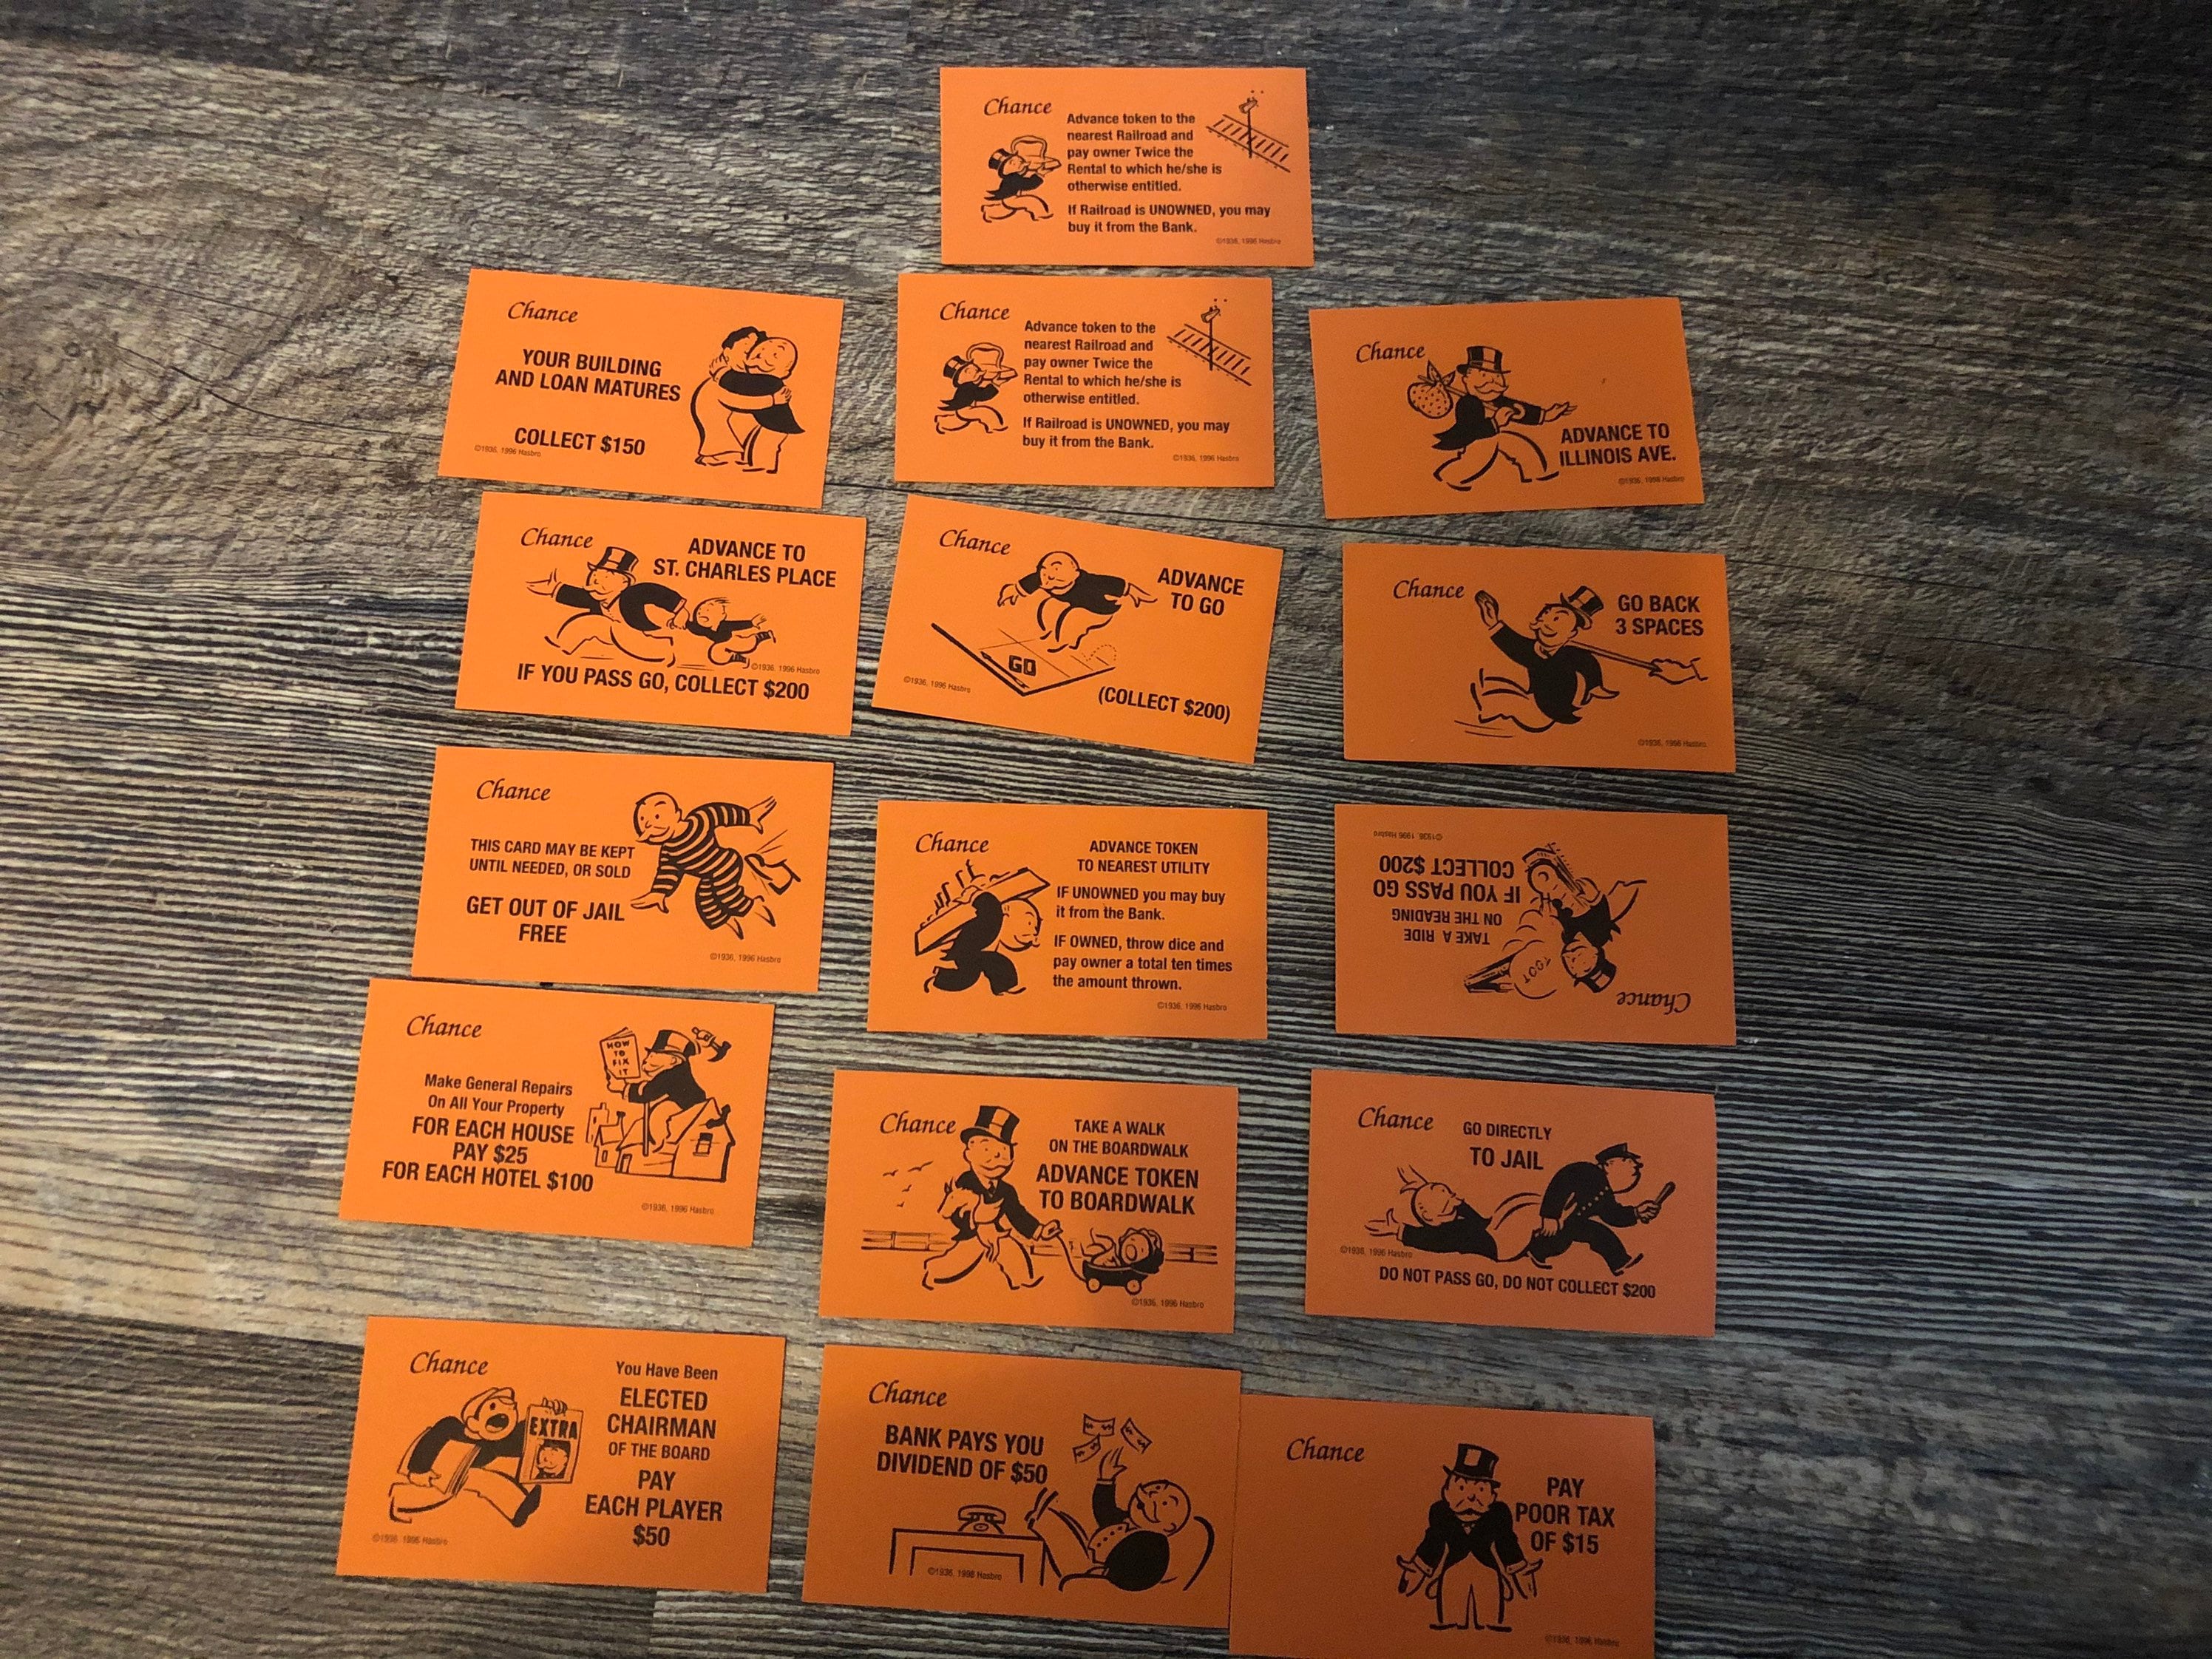 chance cards from monopoly